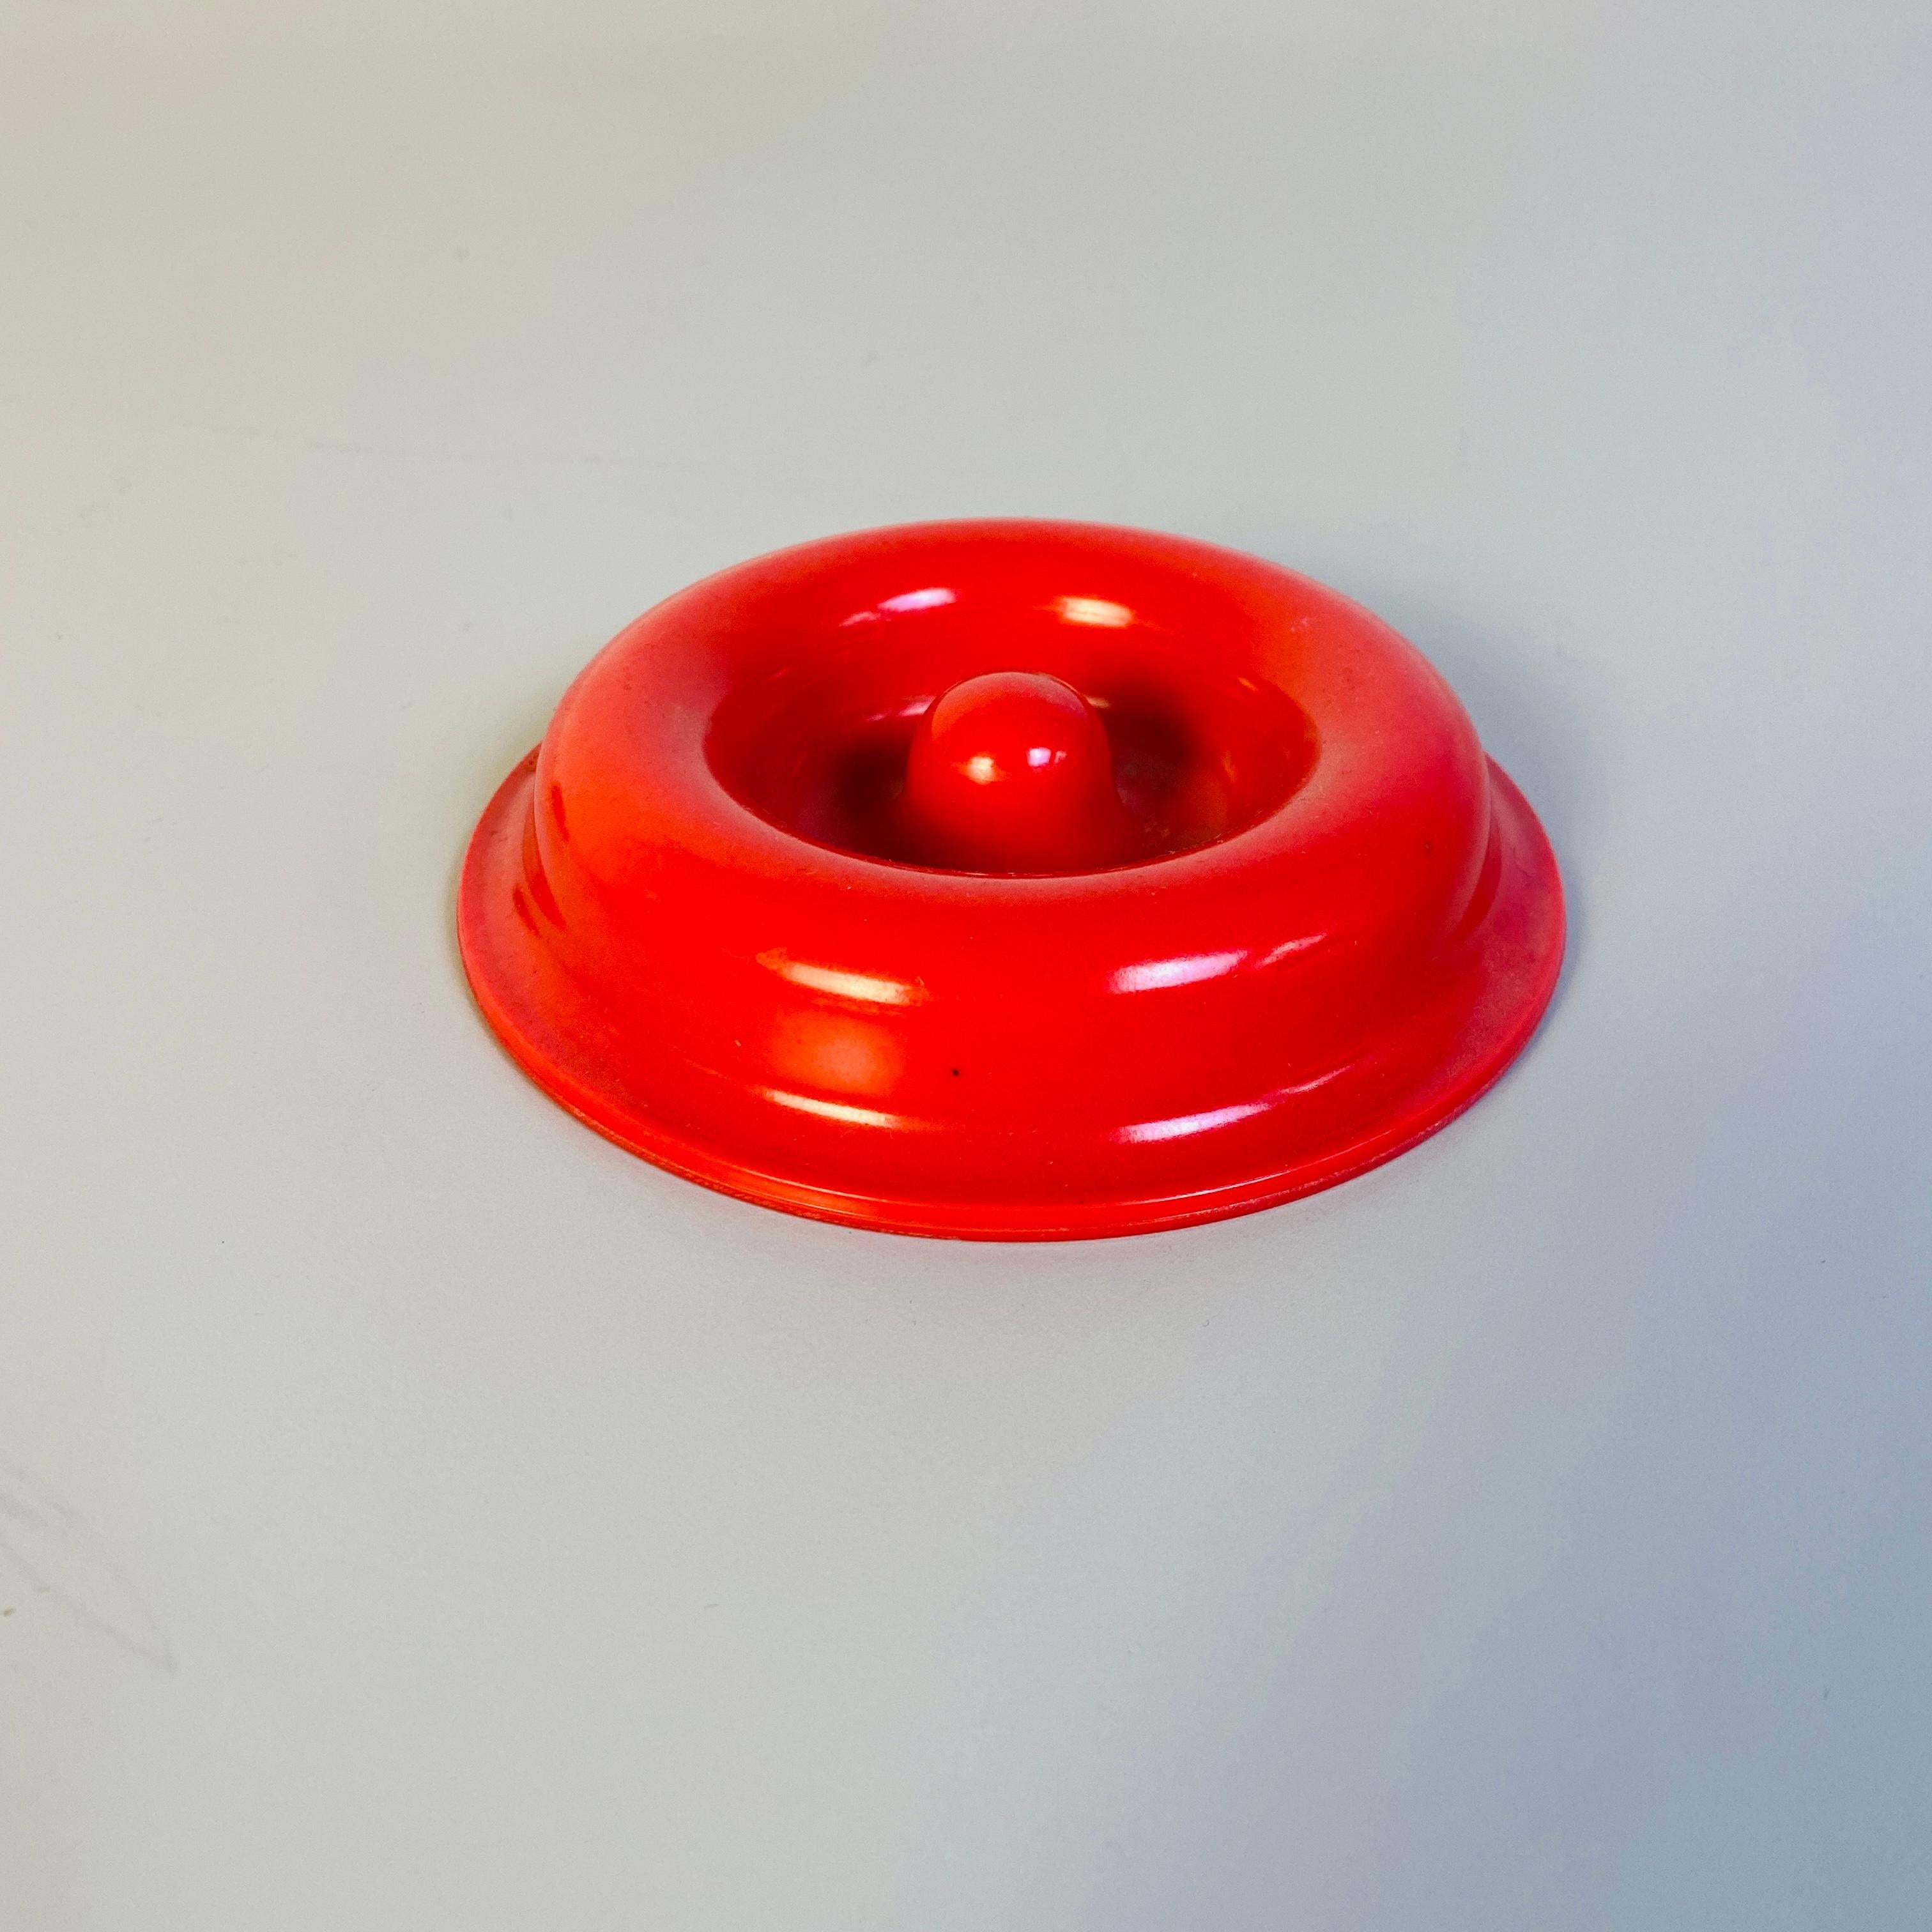 Italian red plastic ashtray mod 4632 \ 4636 by Isao Hosoe for Kartell, 1971
Red plastic ashtray mod. mod 4632 \ 4636 by Isao Hosoe for Kartell designed in 1971.

Good conditions

Measures 13 x 3 H cm.